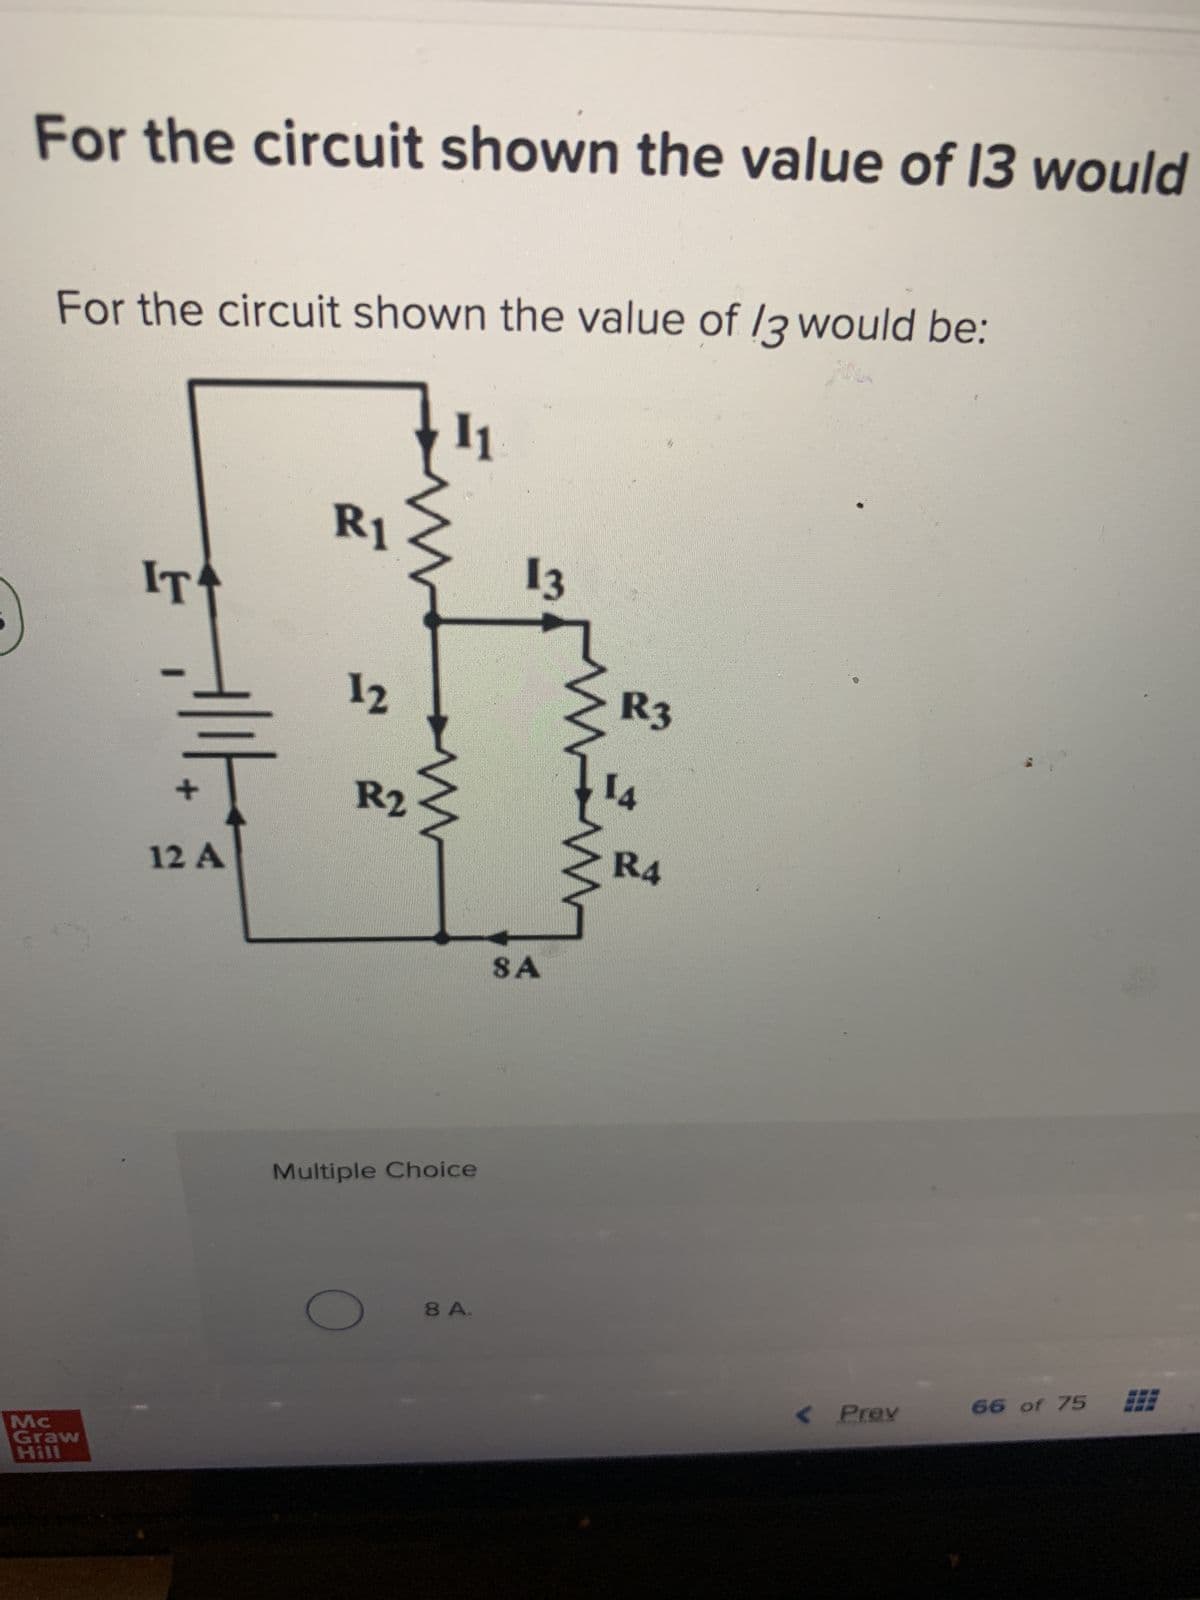 For the circuit shown the value of 13 would
For the circuit shown the value of 13 would be:
Mc
Graw
Hill
IT
Allt
12 A
R1
12
R2
11
www
Multiple Choice
8 A.
13
SA
in
R3
14
R4
< Prev
66 of 75
331
***